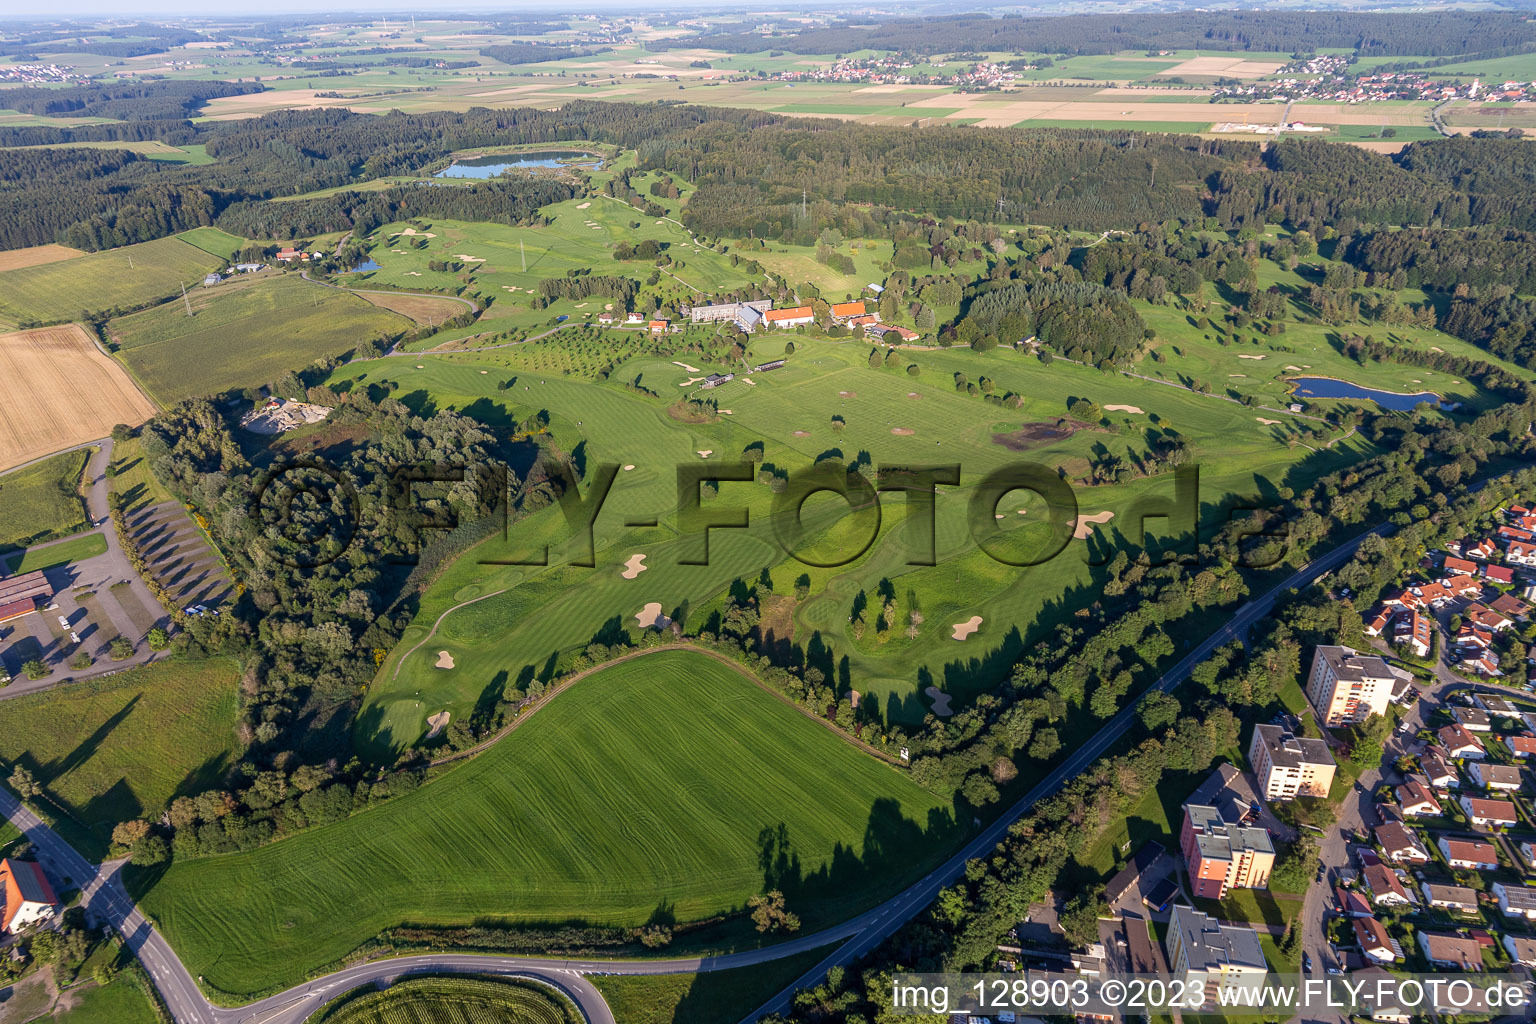 Grounds of the Golf course at of Fuerstlicher Golfclub Oberschwaben e.V. in Bad Waldsee in the state Baden-Wuerttemberg, Germany